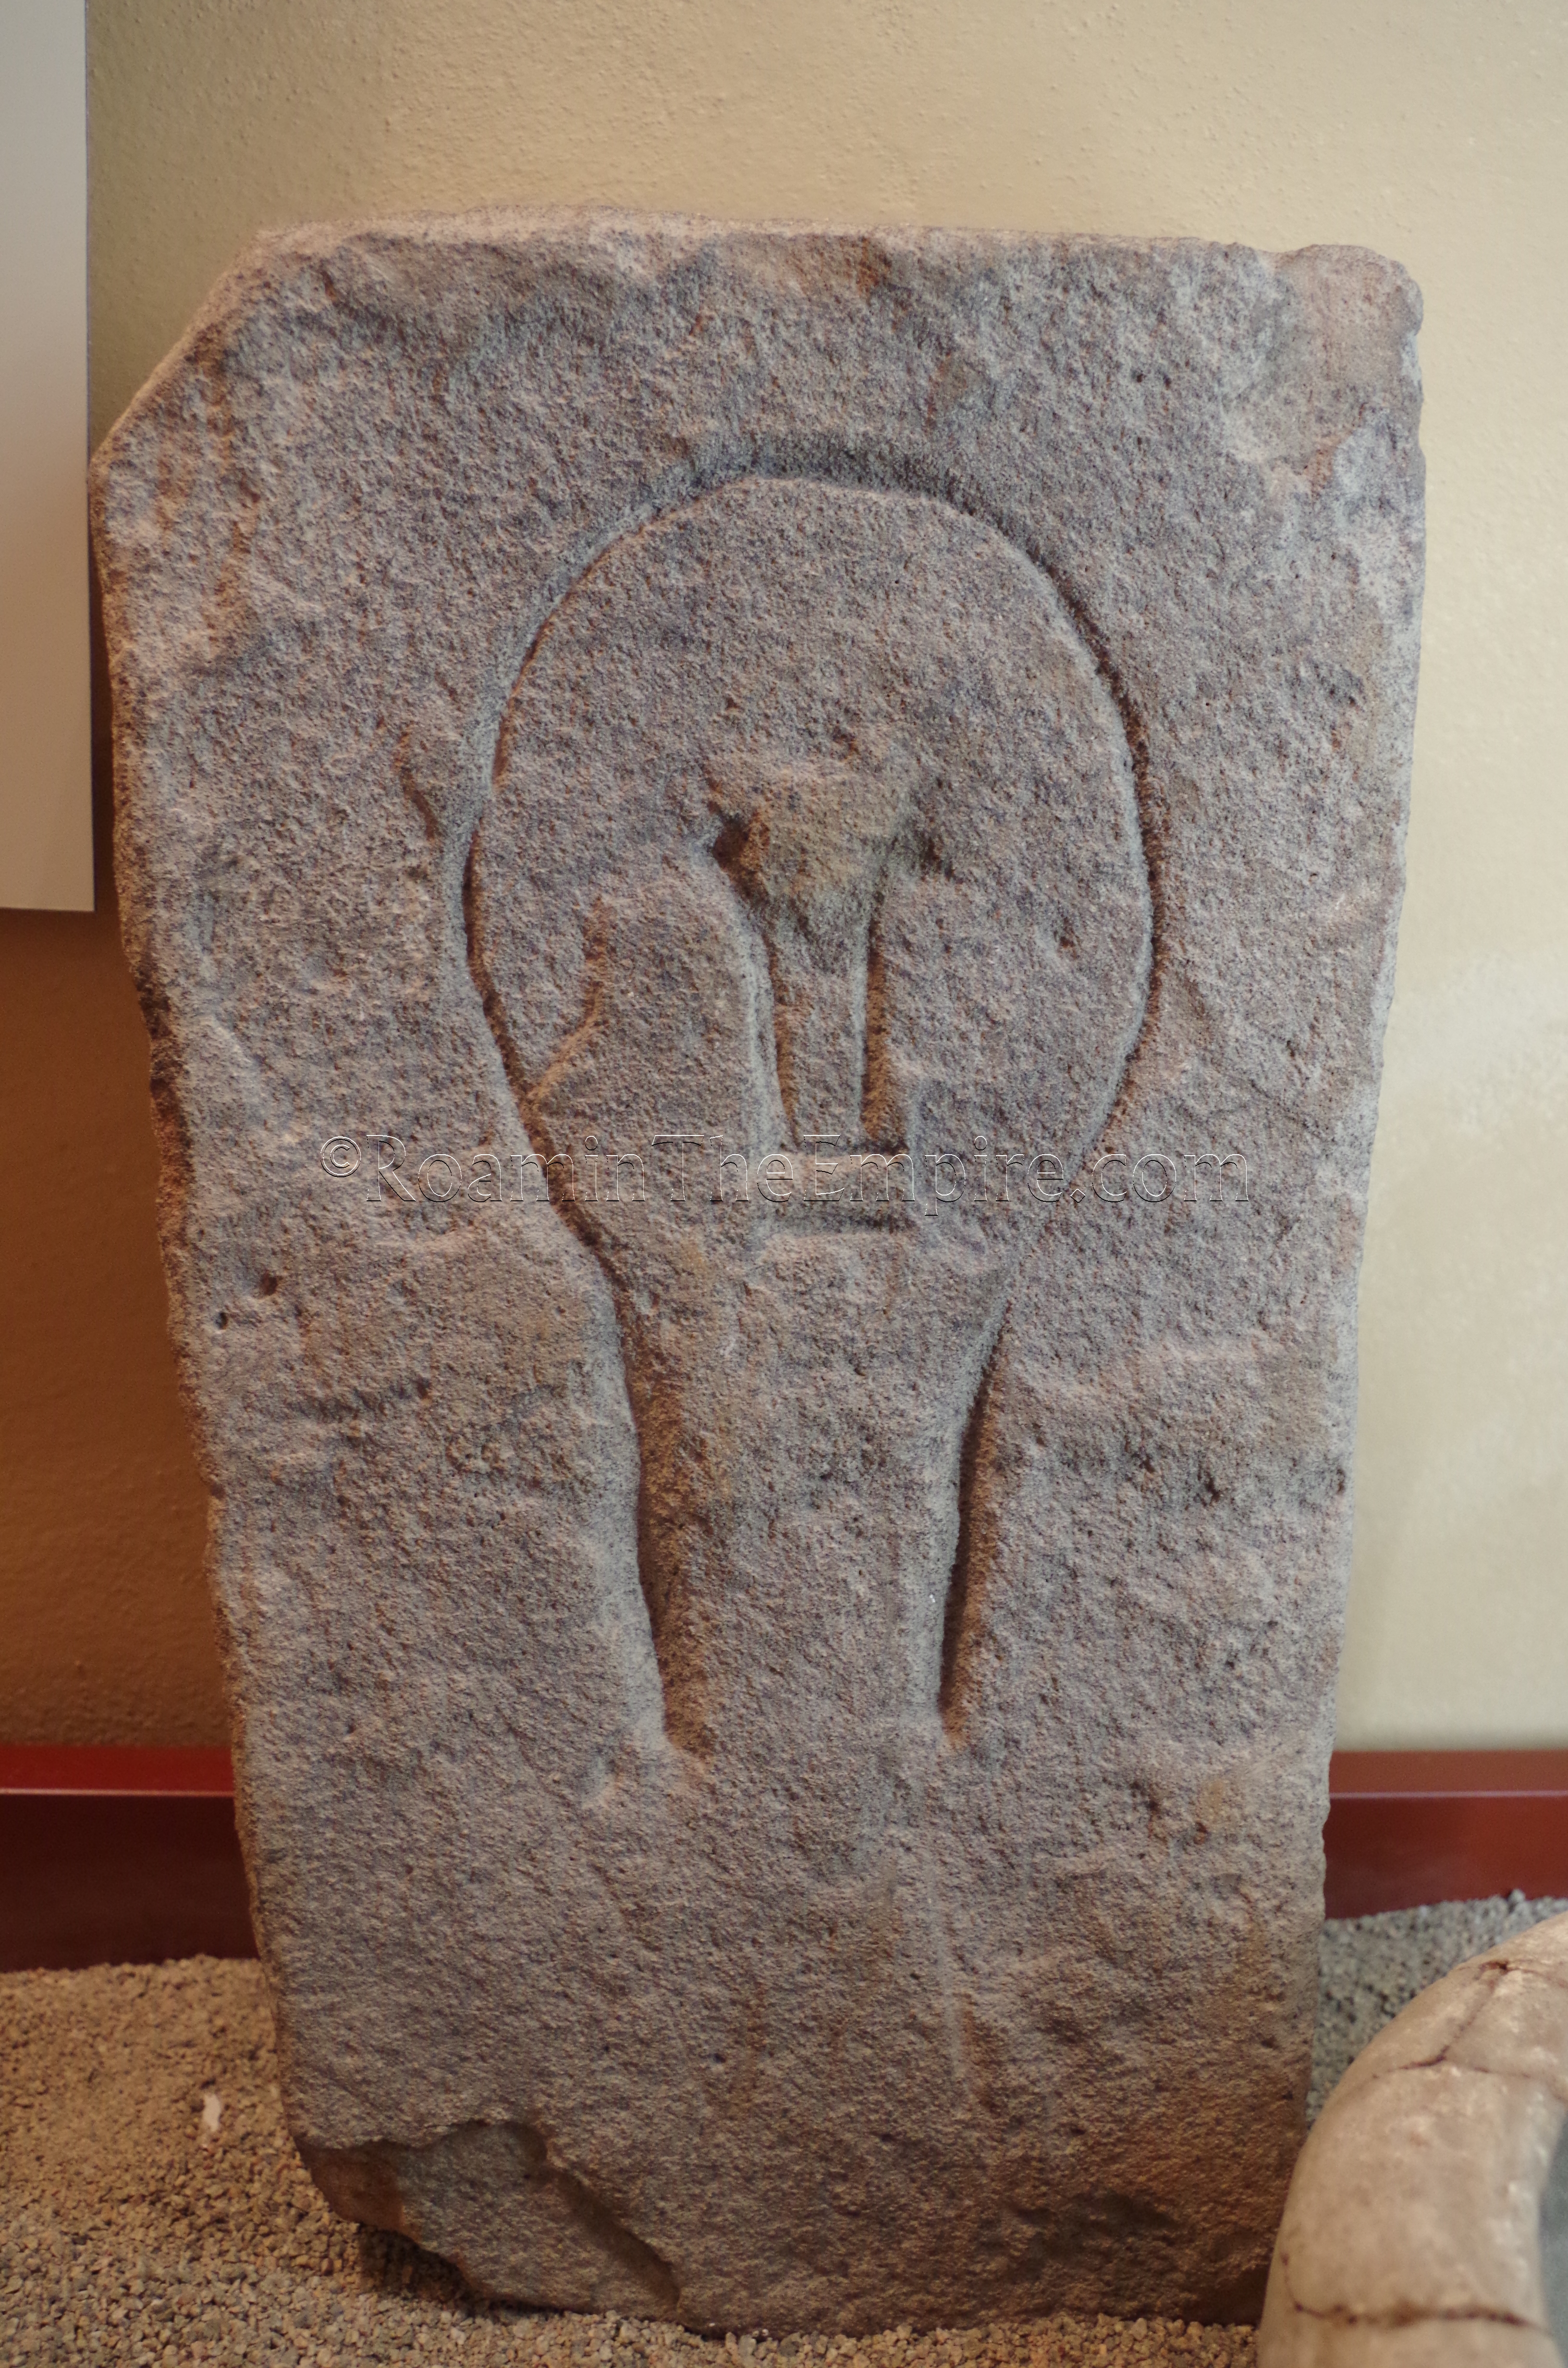 Roman stele with Punic style head. Museo Archeologico Alle Clarisse.